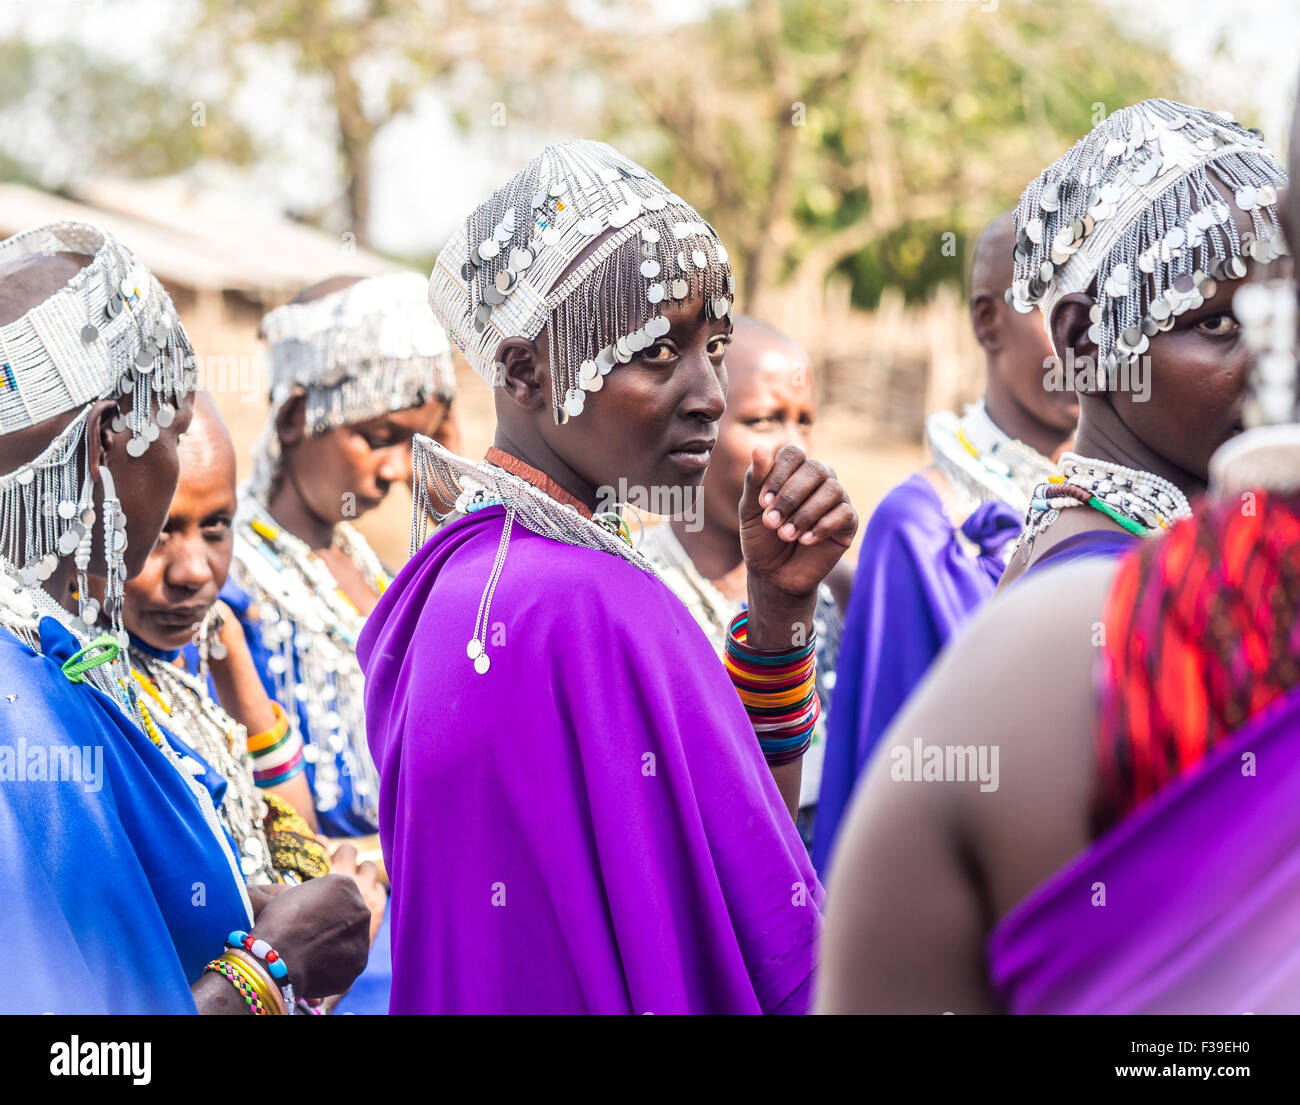 Maasai women in traditional outfits during the ceremony of transition into a new age-set for boys and girls from their community Stock Photo